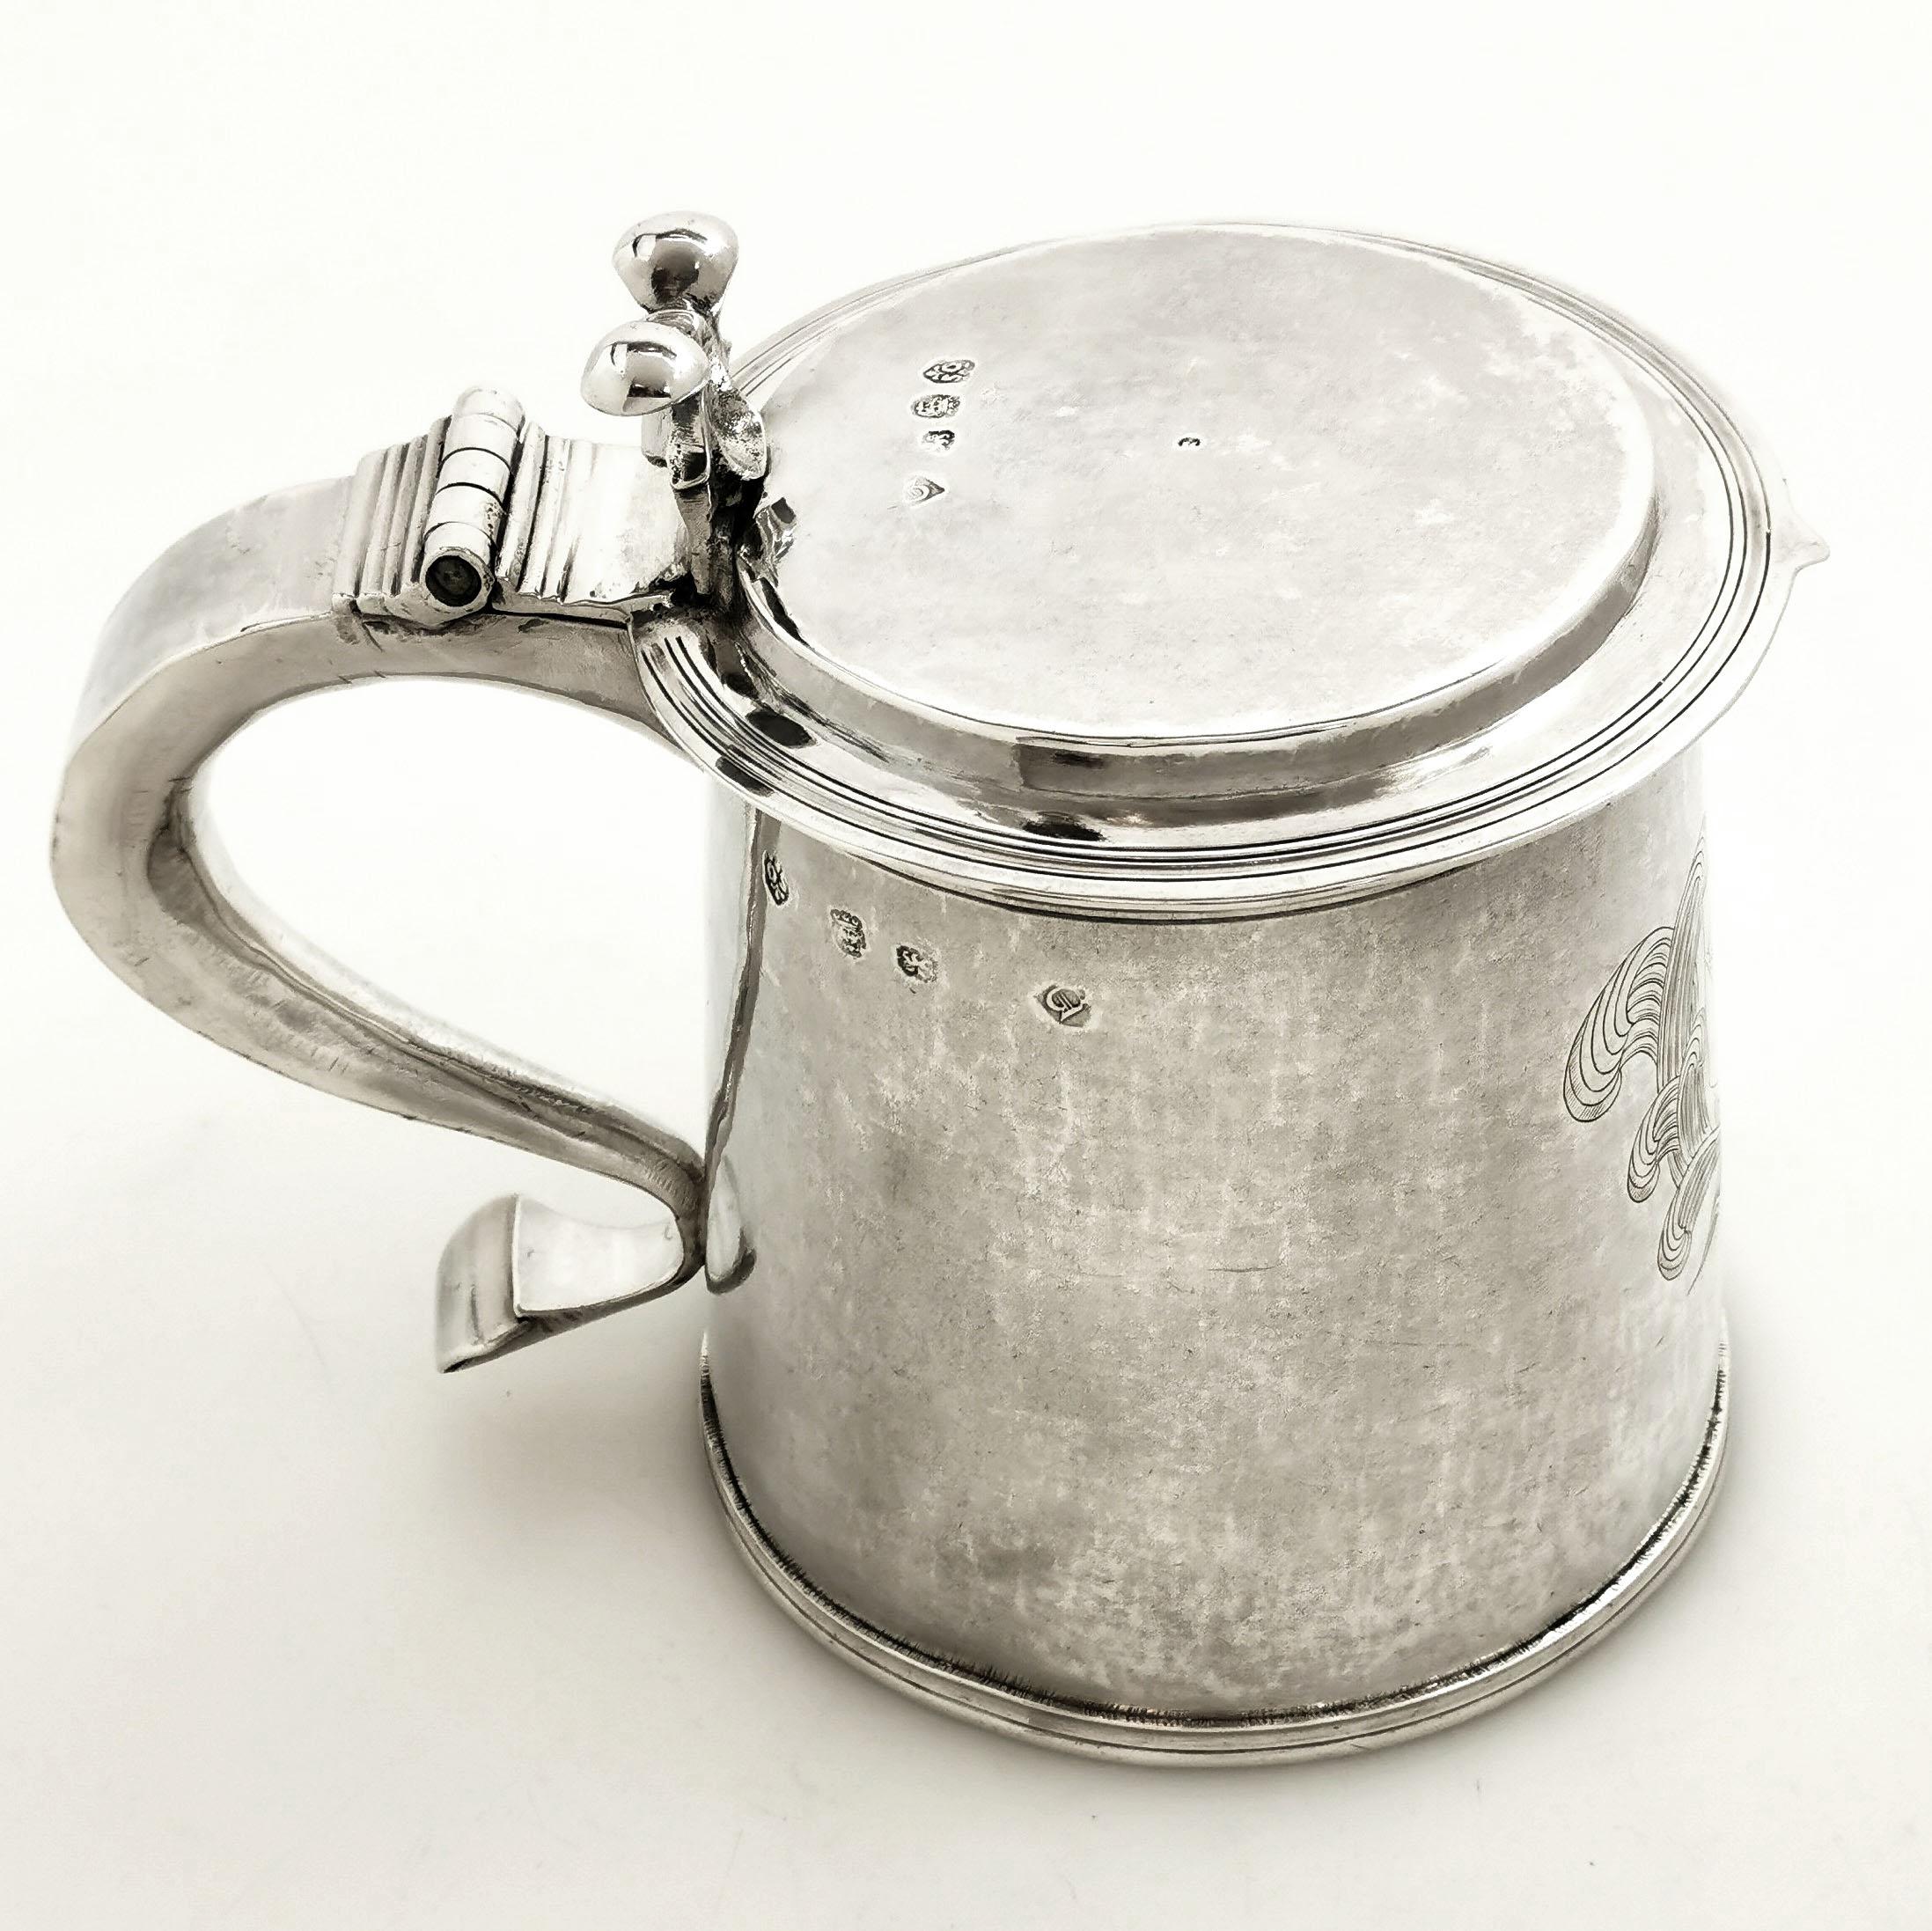 A magnificent Antique Charles II sterling Silver Lidded Tankard. This Tankard has a slight tapered straight sided form with a hinged flat lid. The Tankard features a large engraved crest opposite a substantial scroll handle and a shaped thumb piece